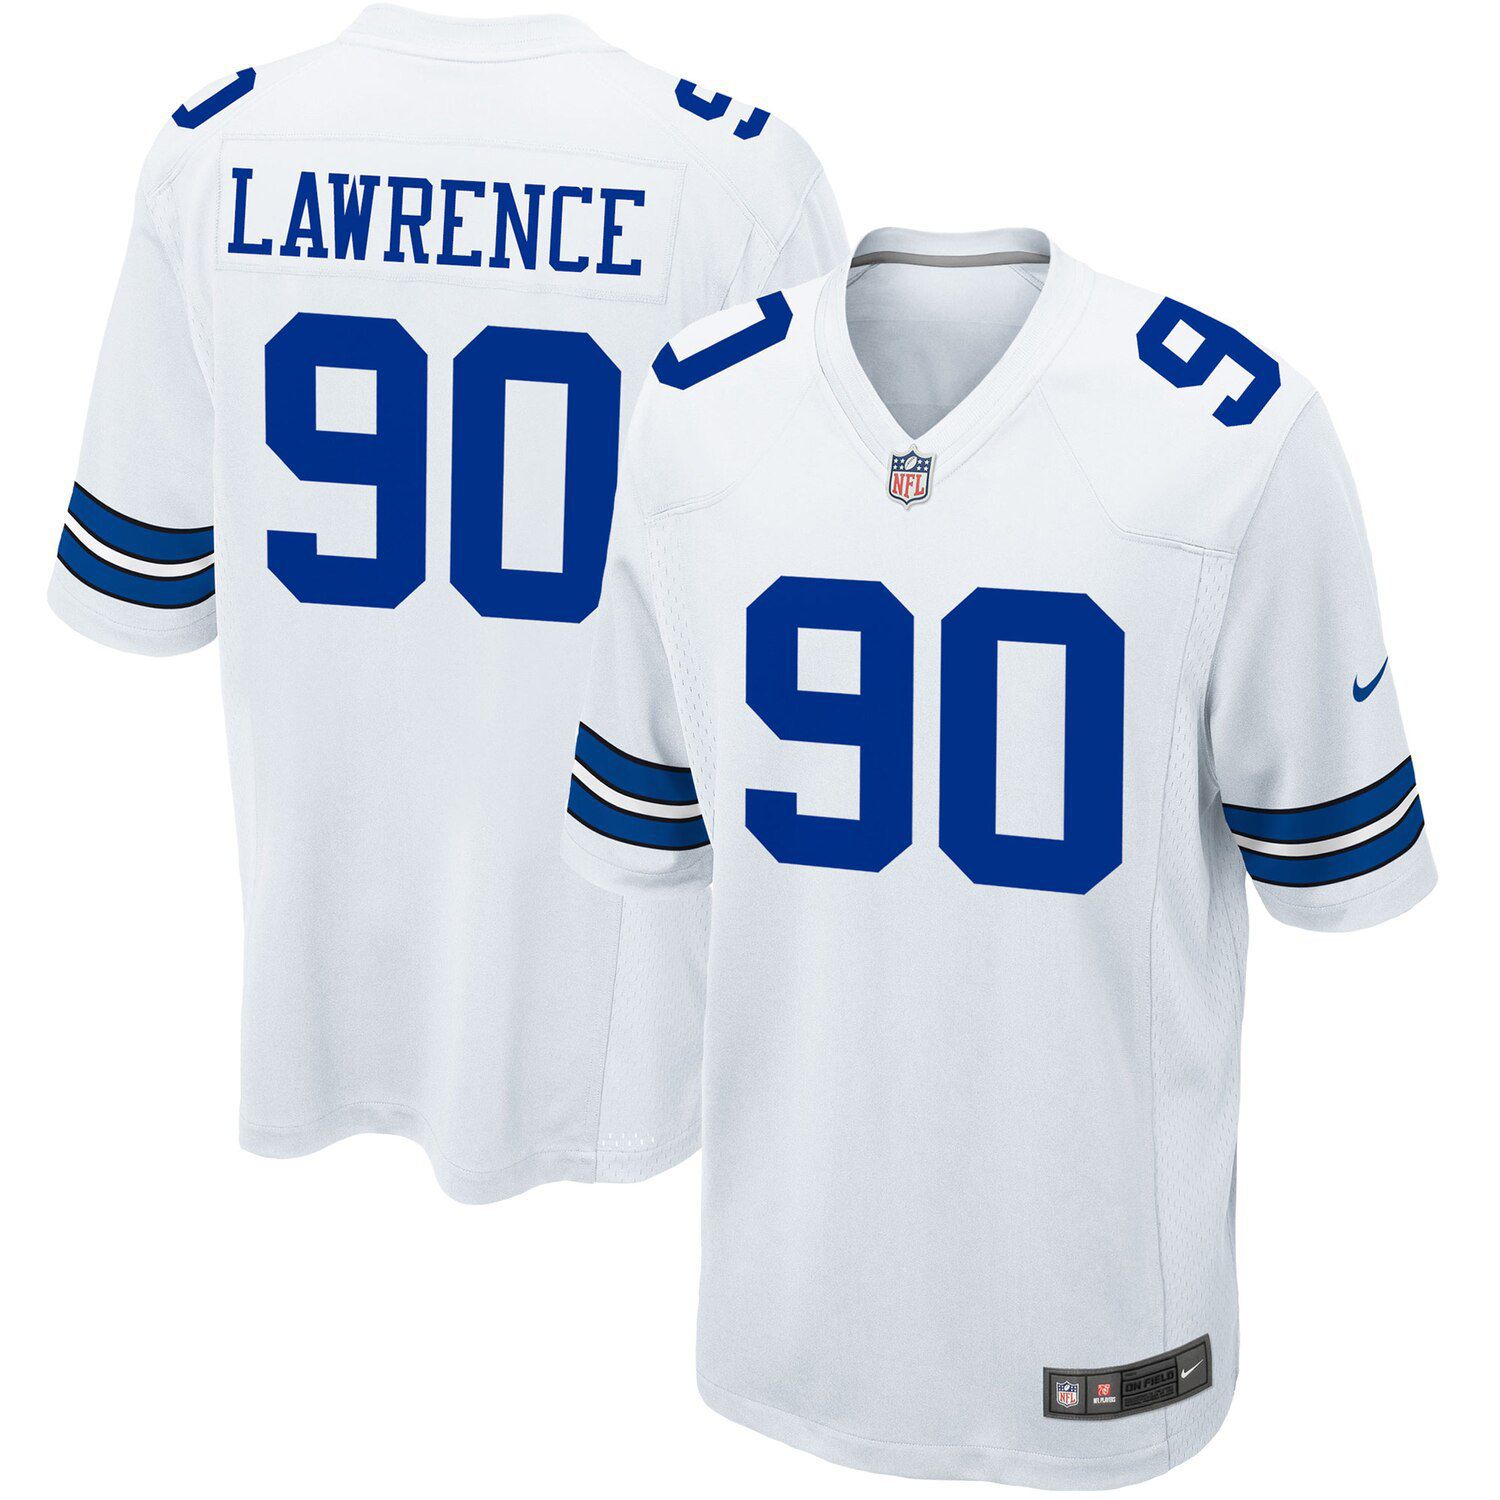 demarcus lawrence white jersey